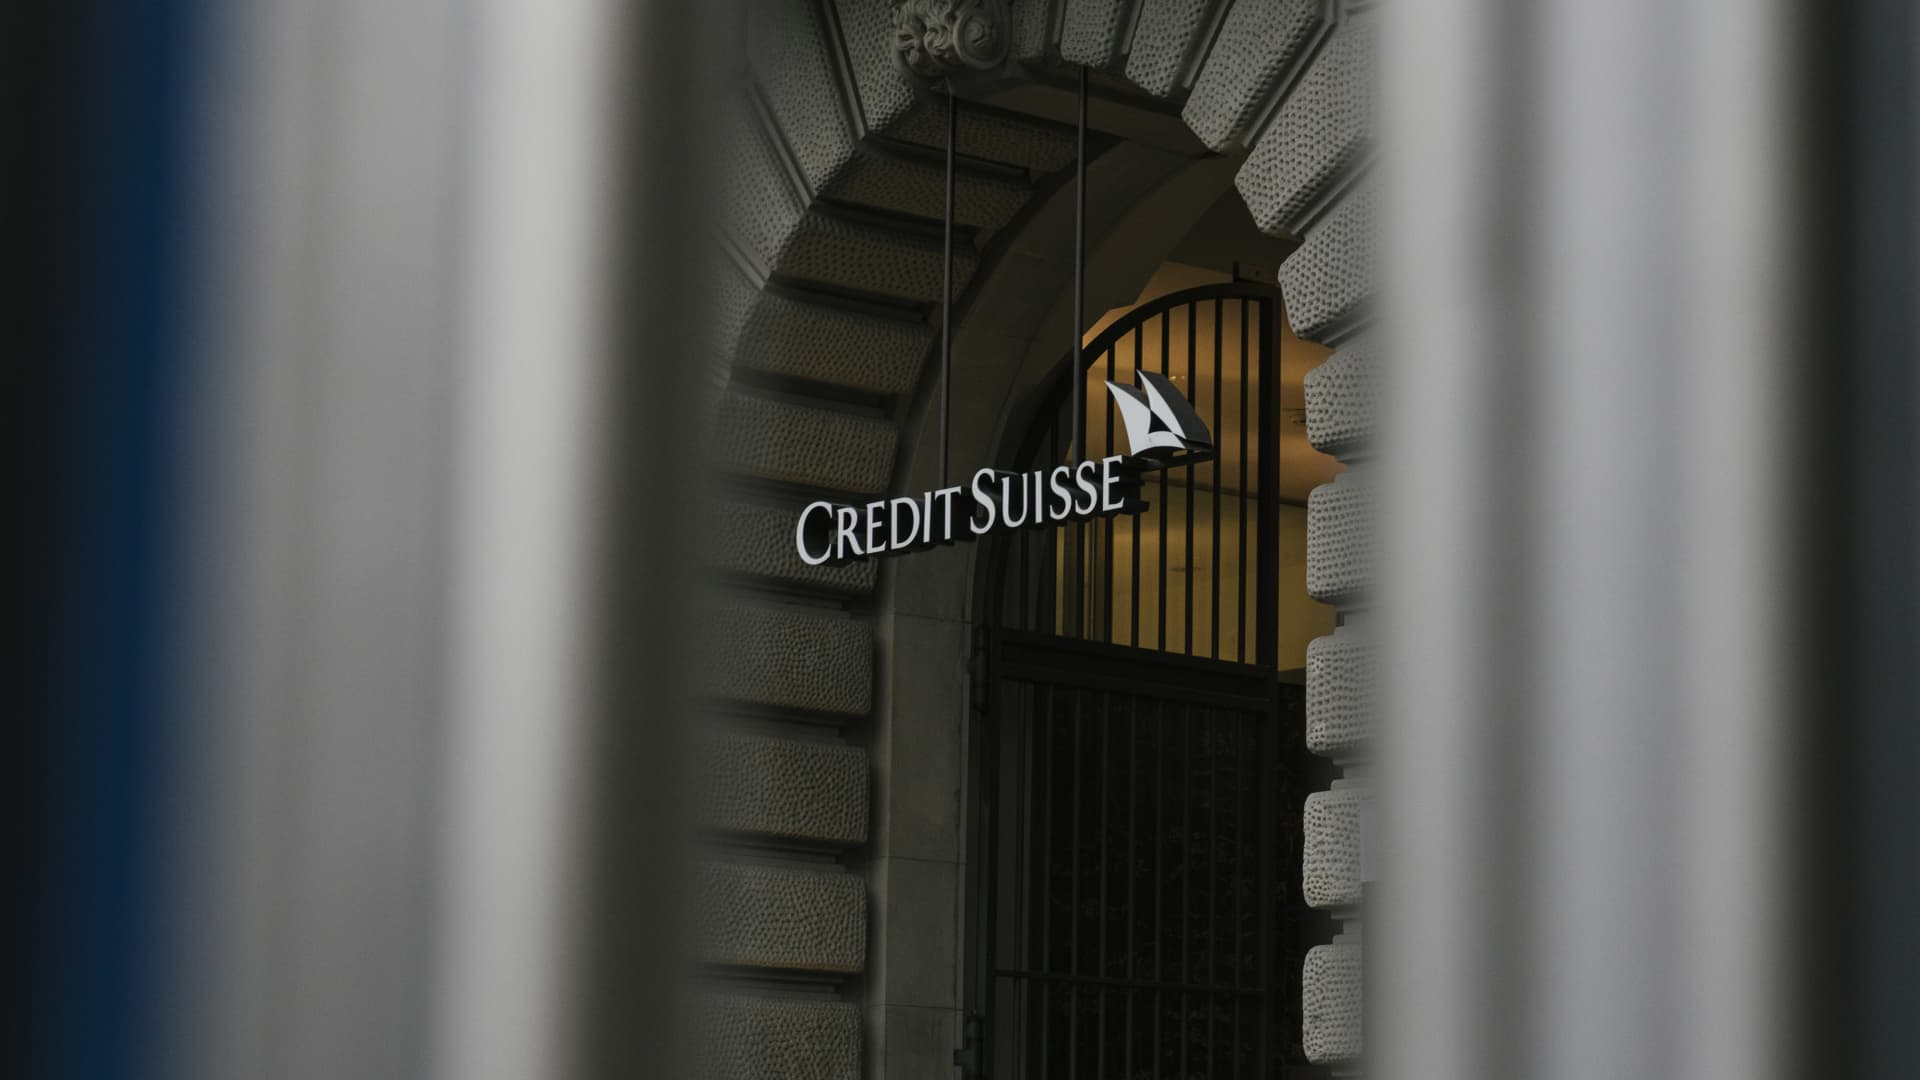 Credit Suisse to overhaul its risk management after Archegos and other scandals